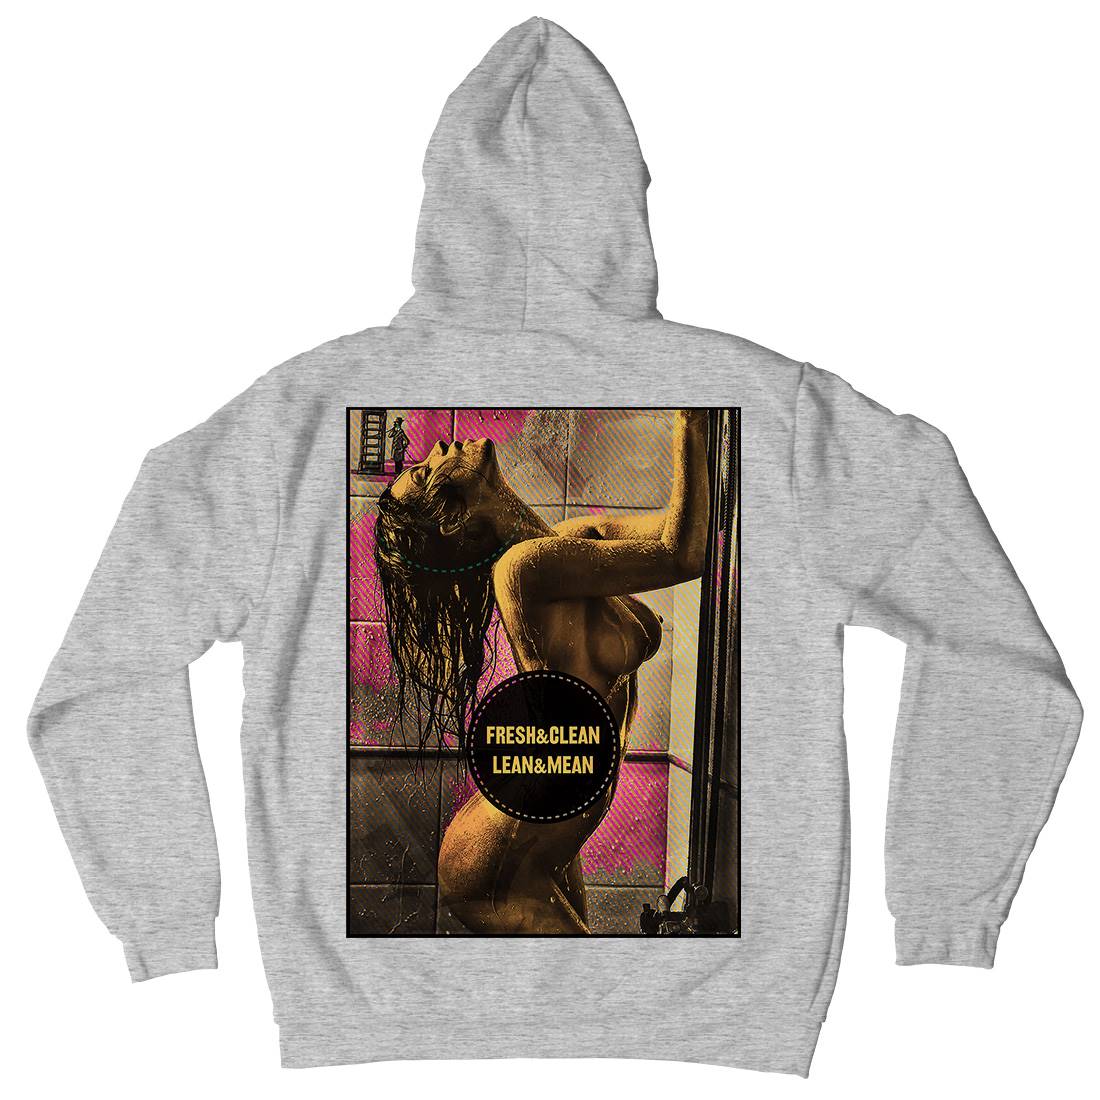 Shower Girl Mens Hoodie With Pocket Art A908